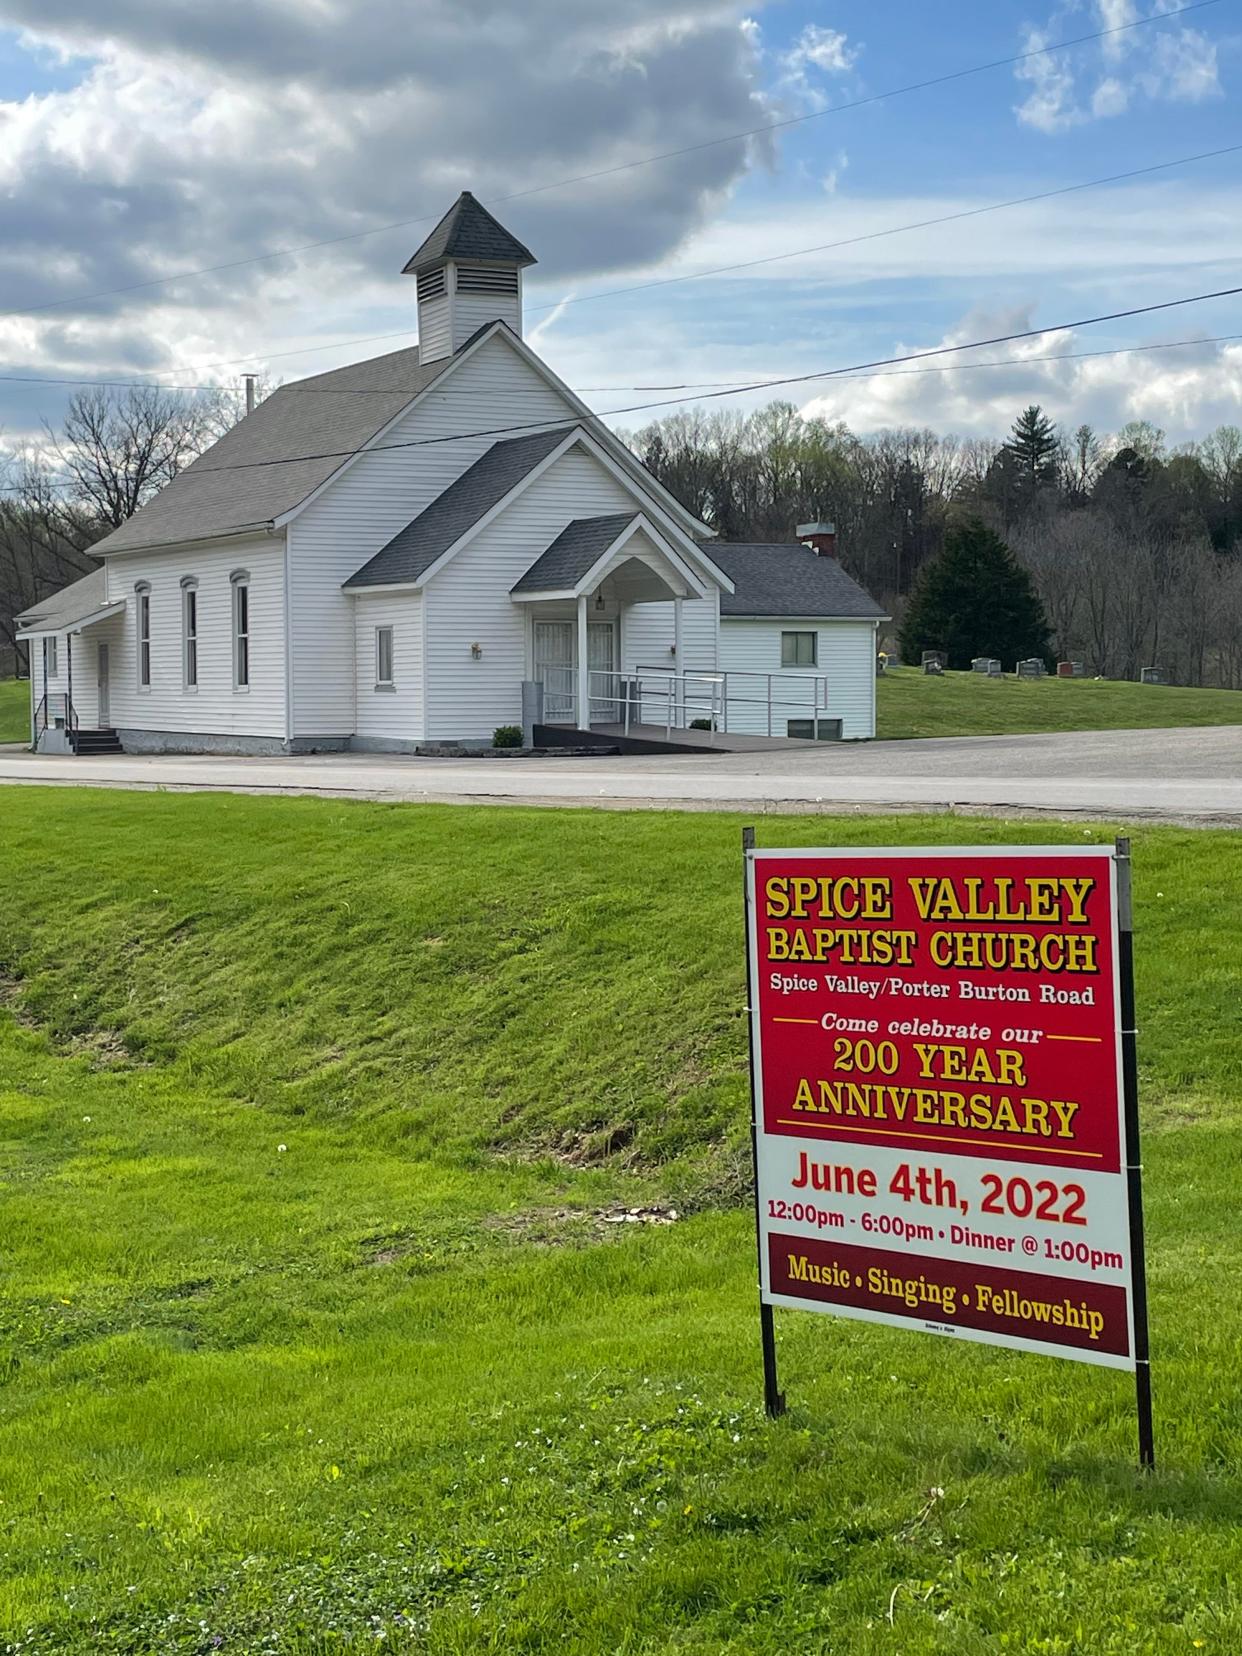 Spice Valley Baptist Church in Mitchell will celebrates its 200-year anniversary June 4.